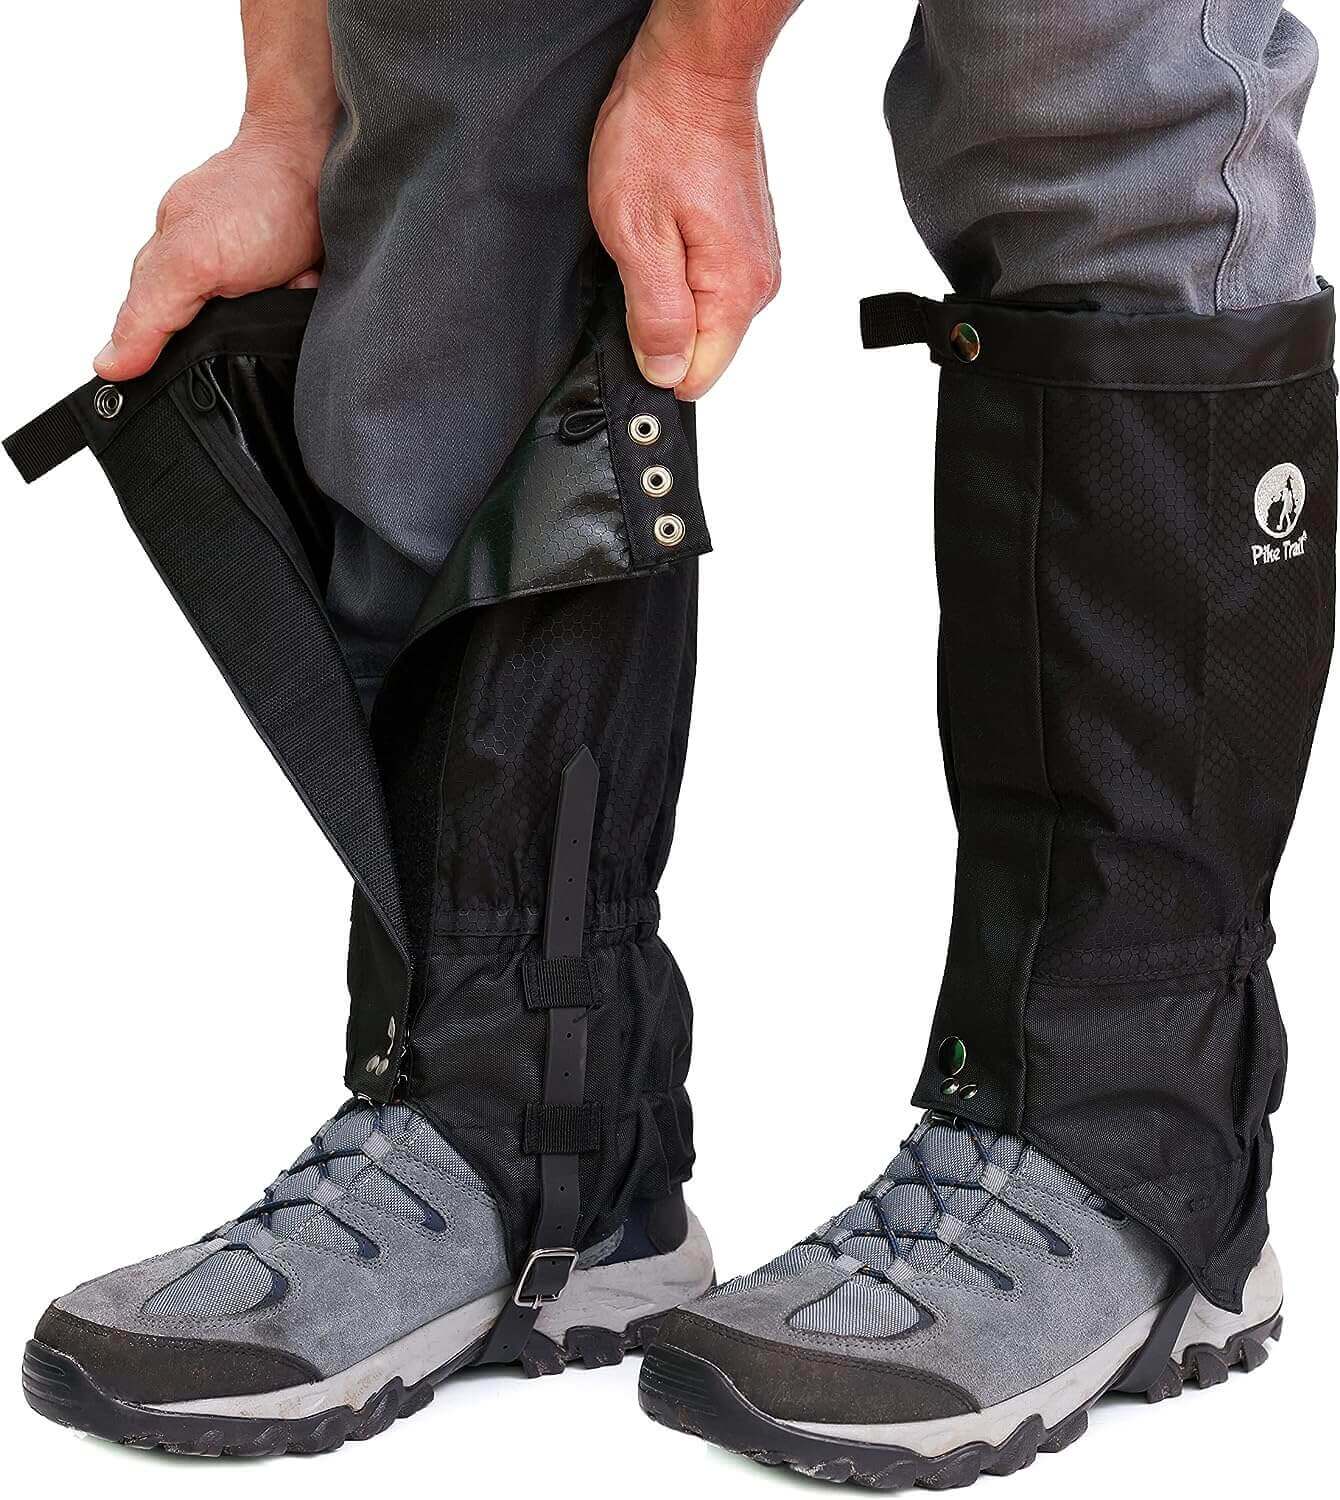 Shop The Latest >Pike Trail Waterproof and Adjustable Boot Gaiters For Hiking > *Only $55.99*> From The Top Brand > *Pike Traill* > Shop Now and Get Free Shipping On Orders Over $45.00 >*Shop Earth Foot*